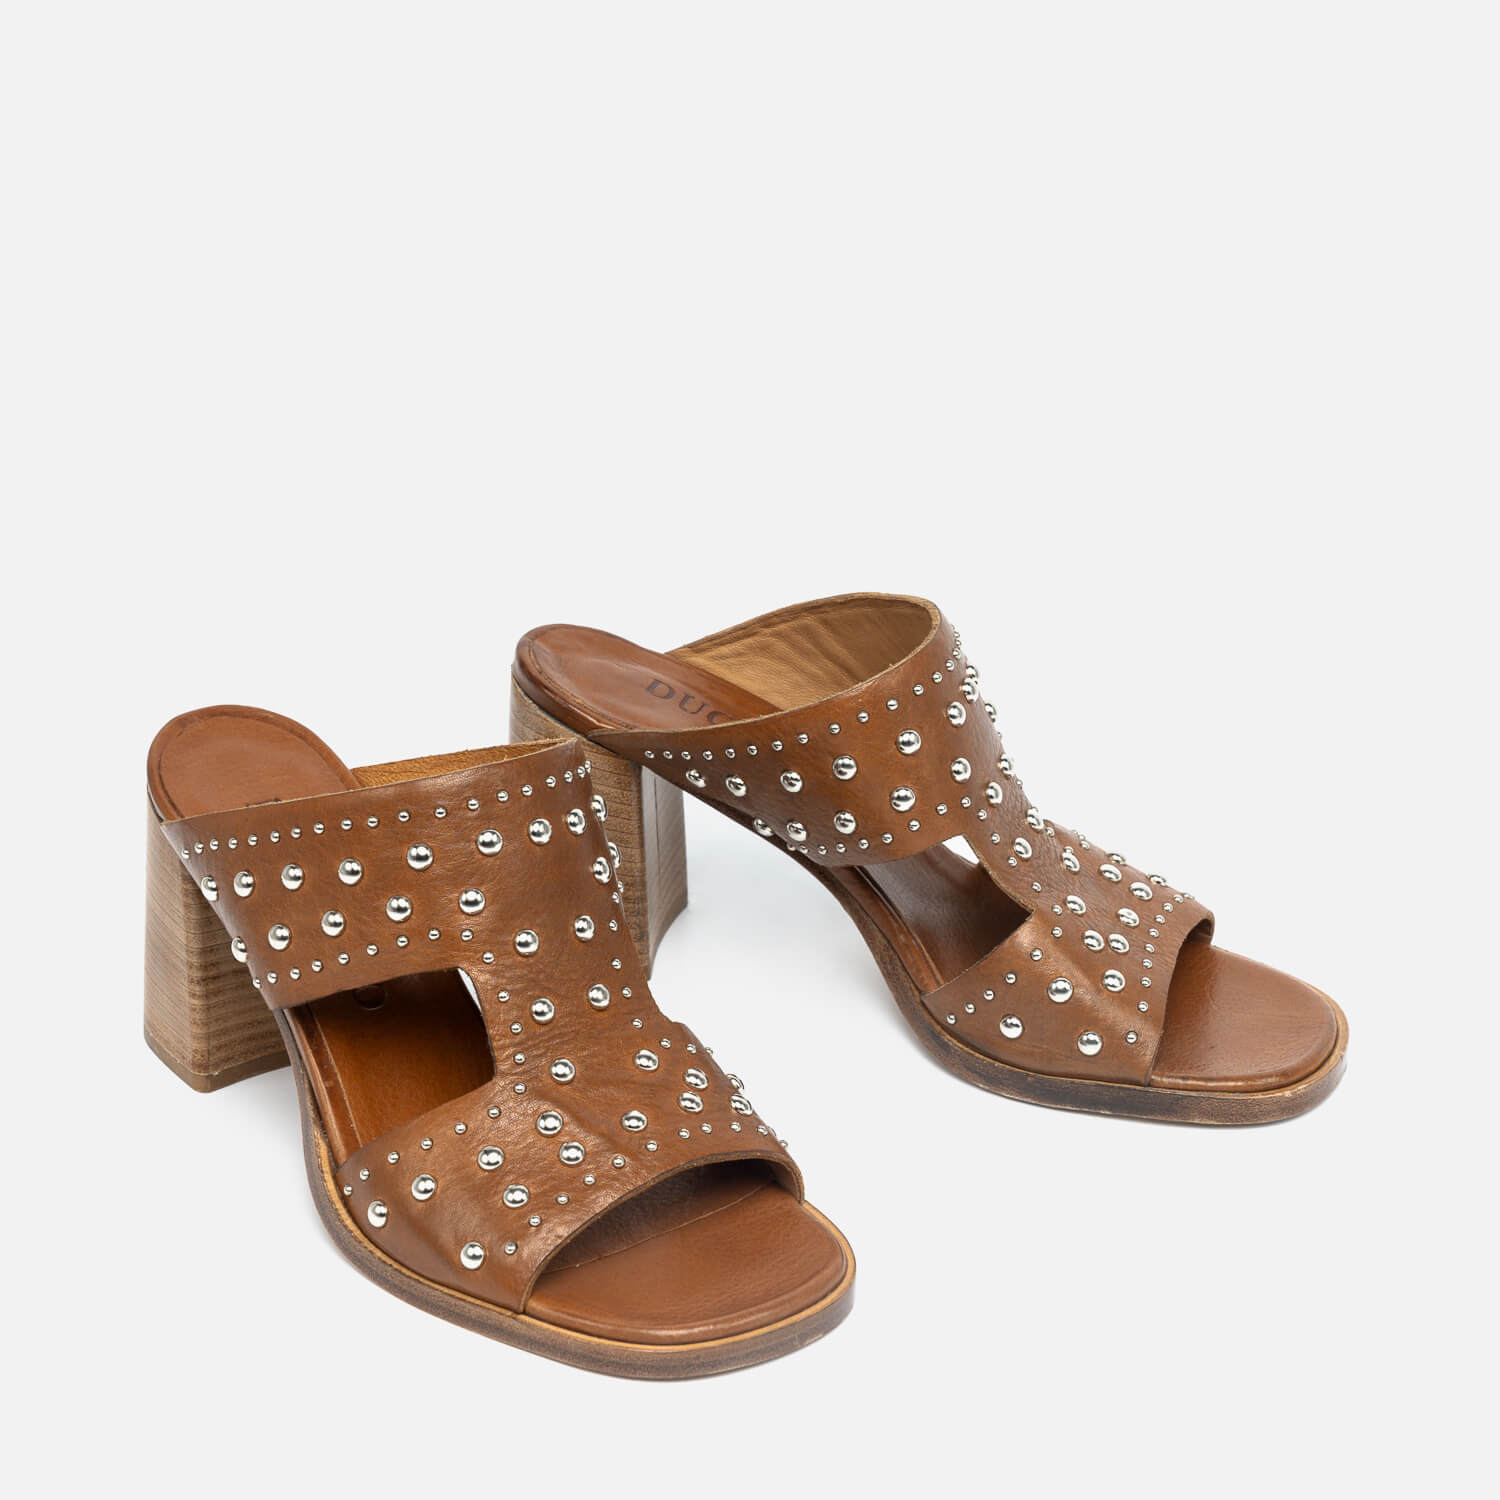 Angelica | Model 3787 sabot-style sandals tan